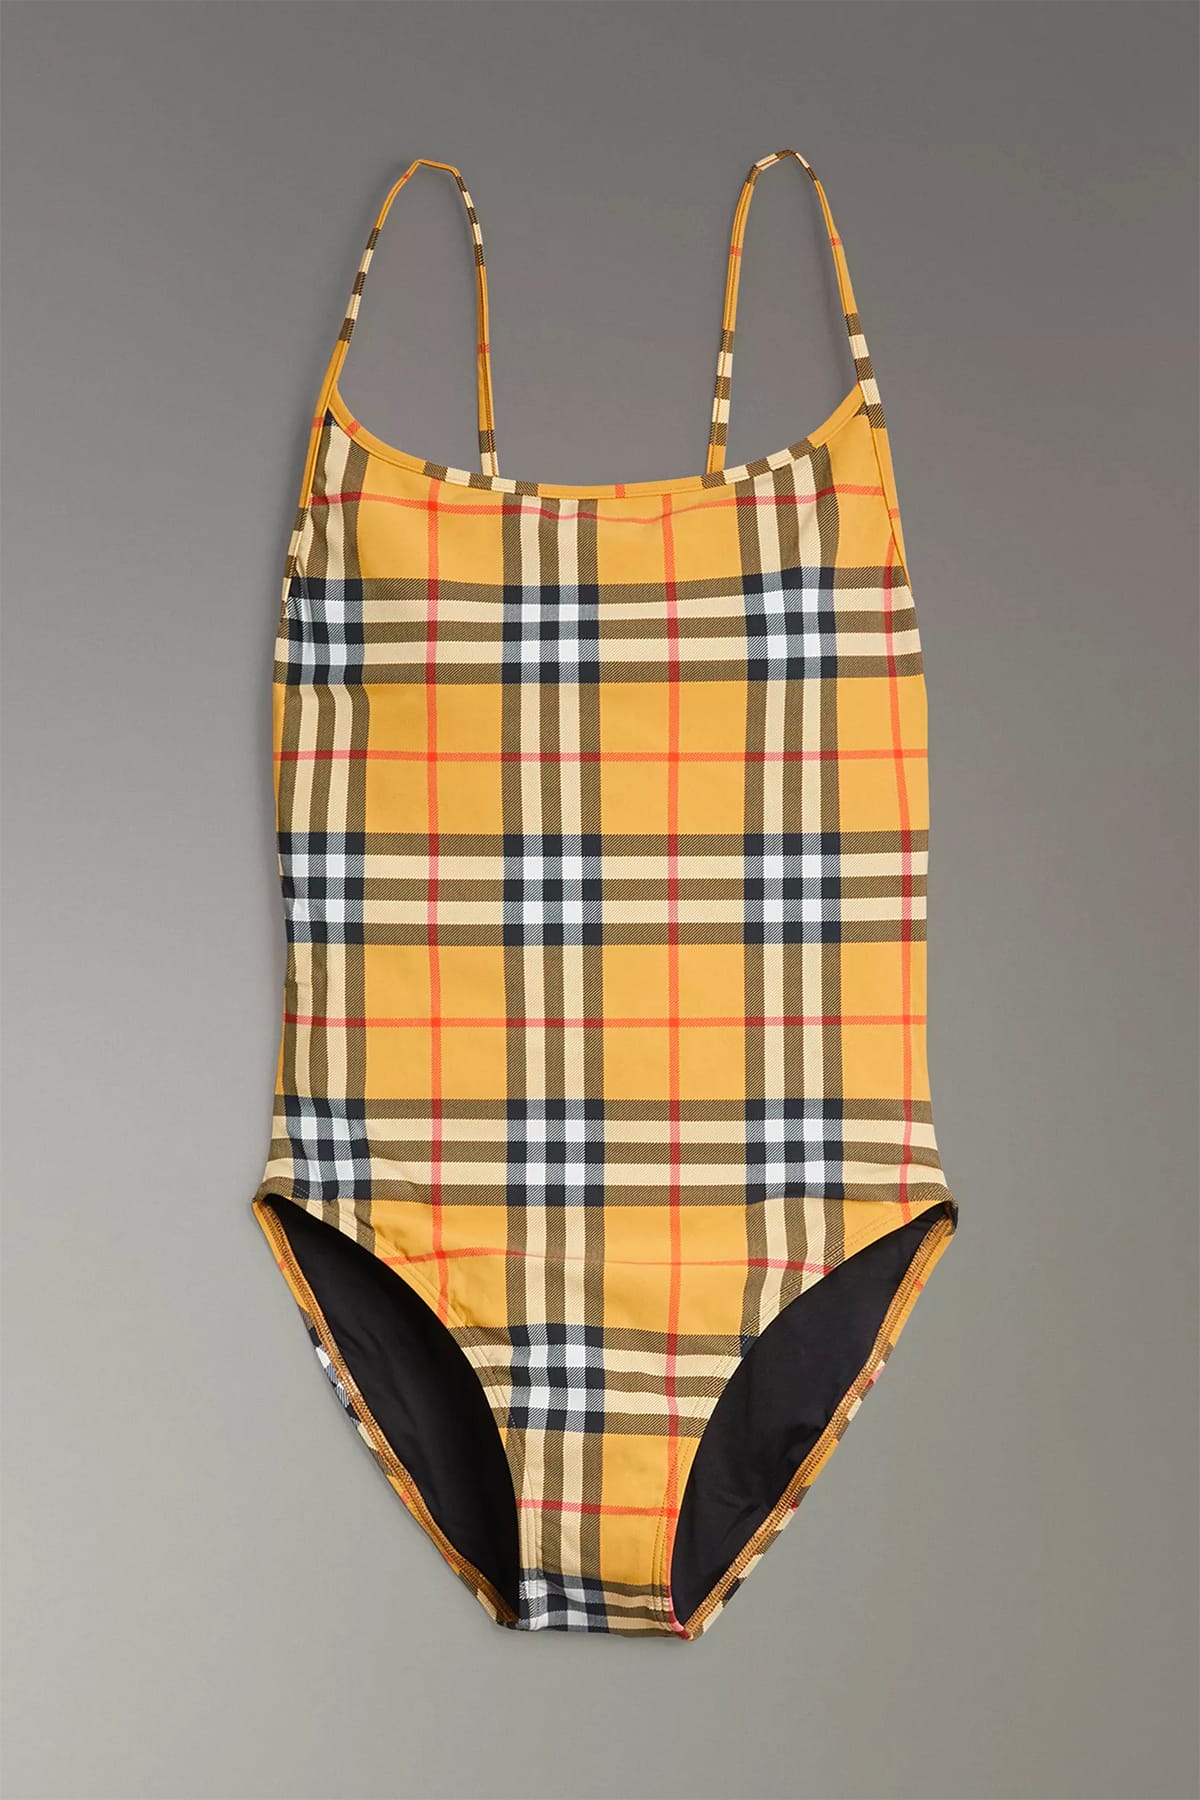 burberry one piece bathing suit